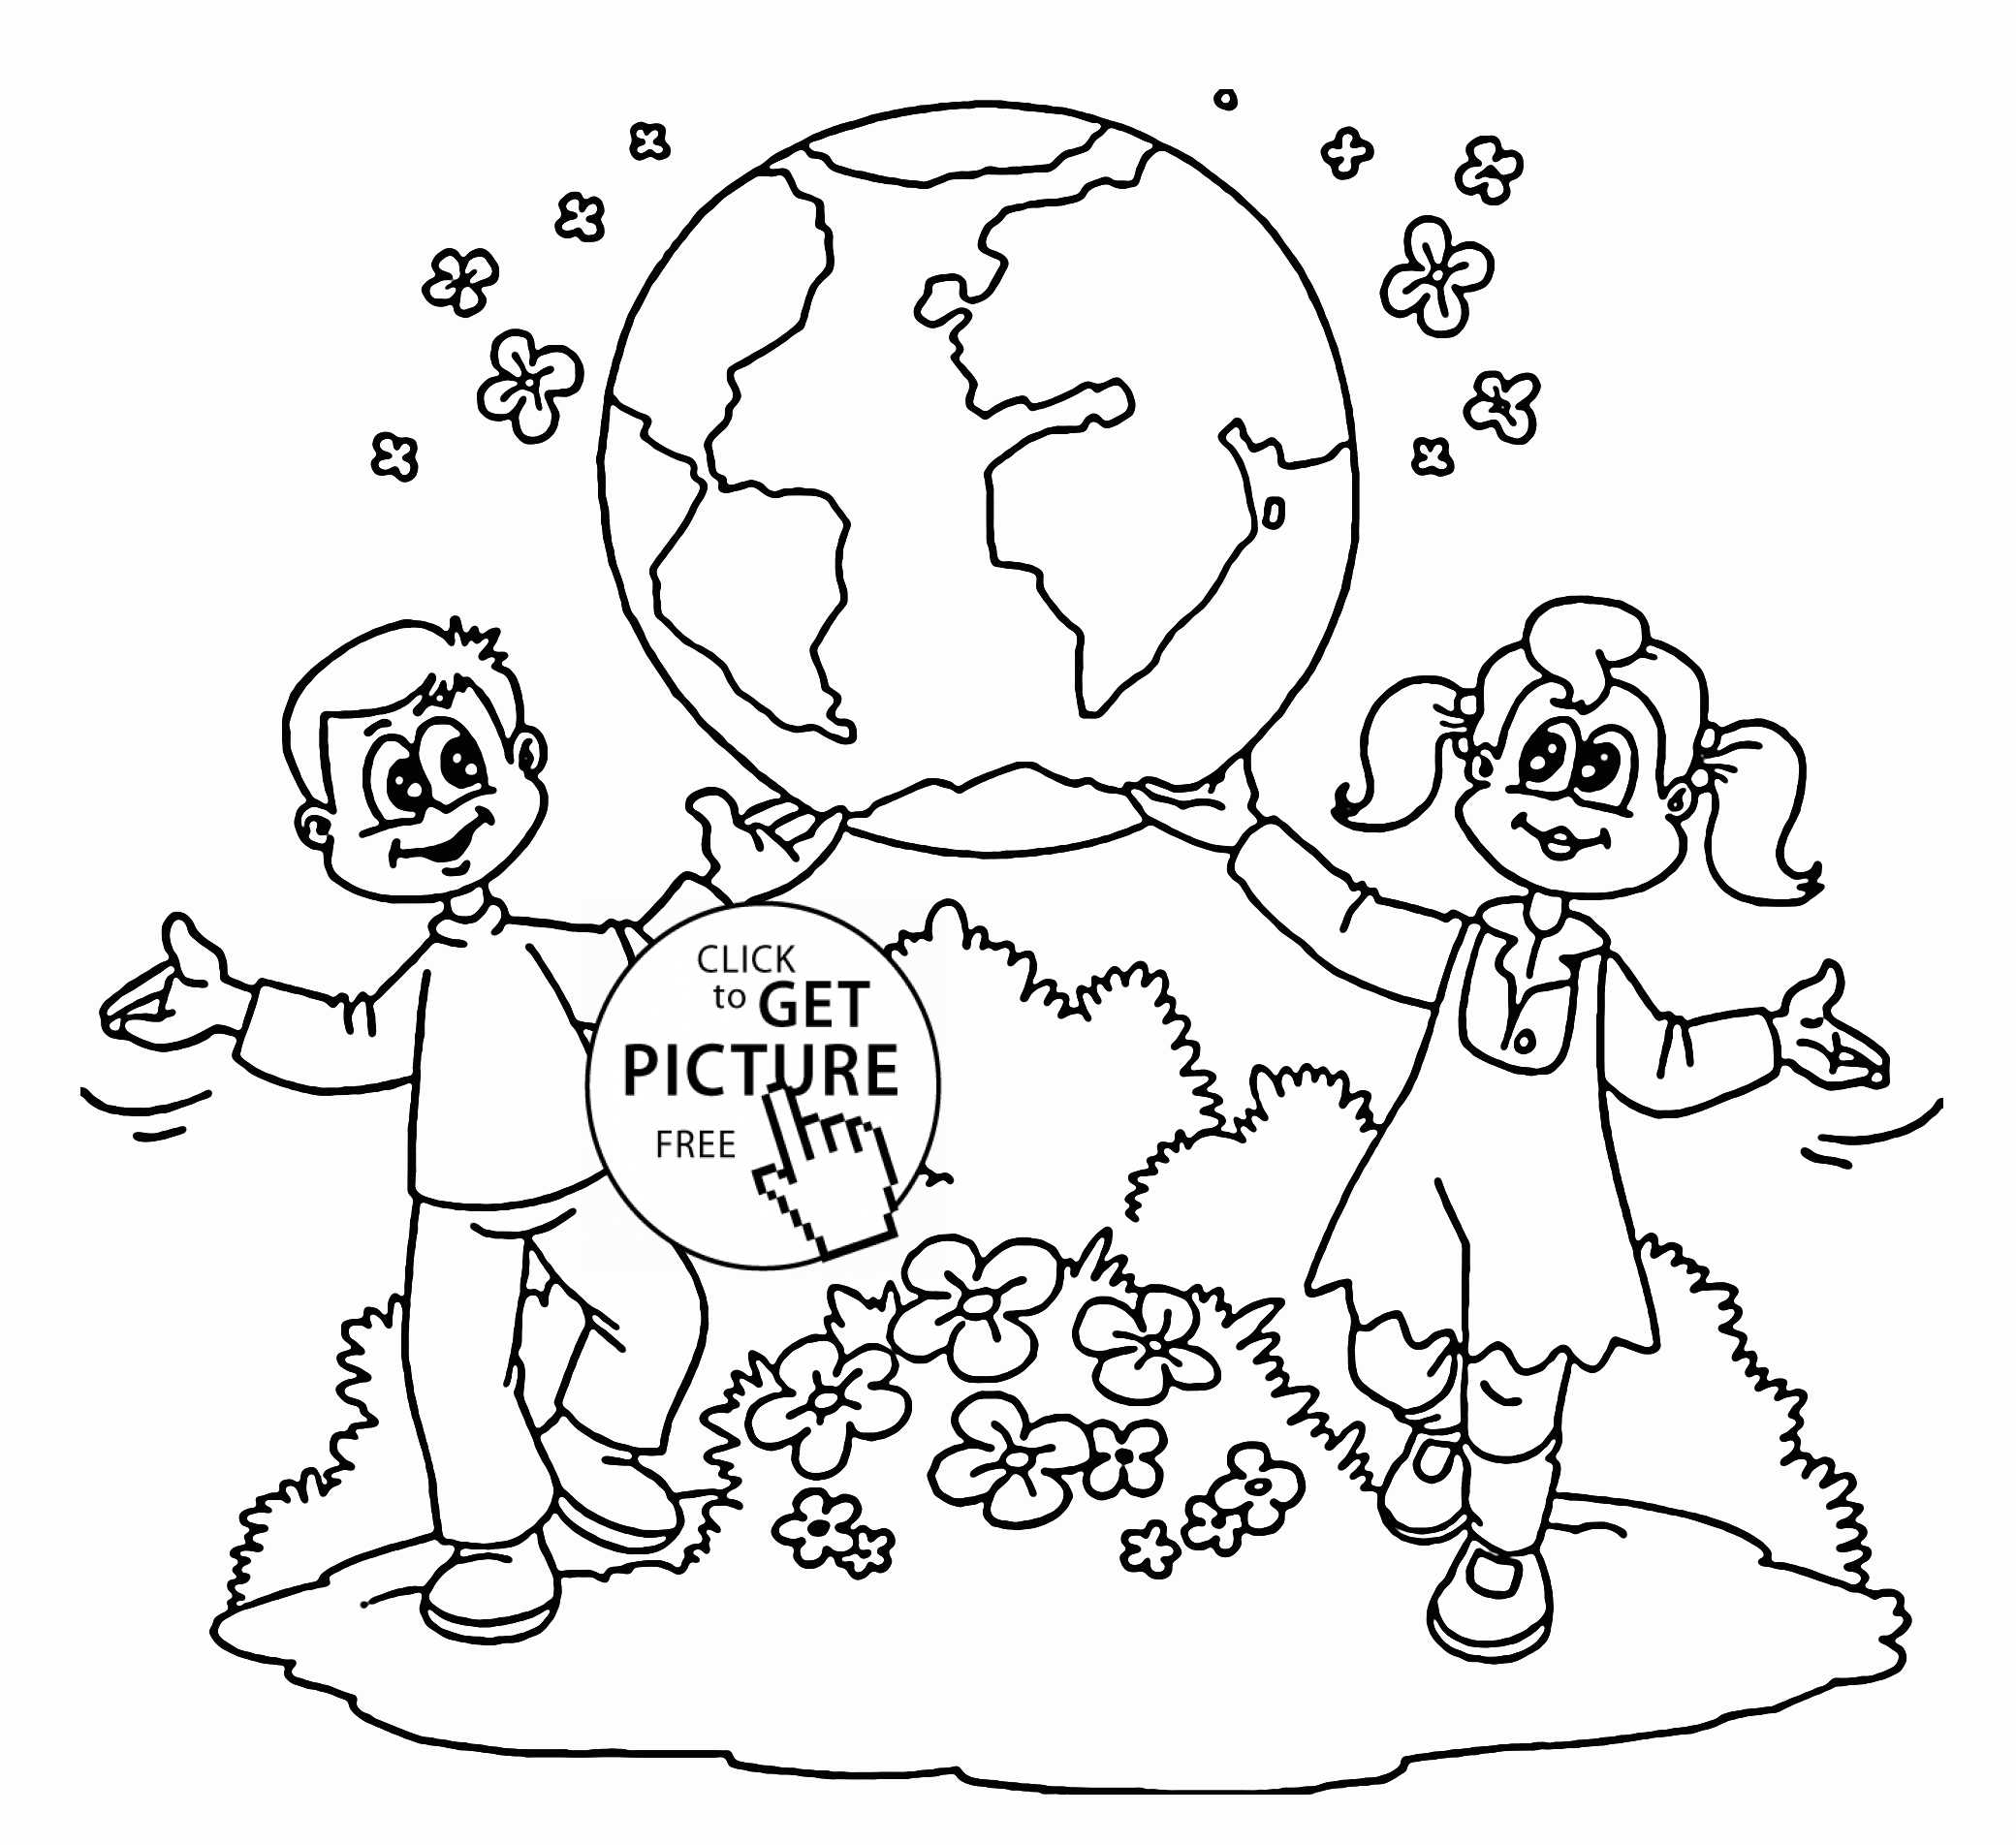 Earth Day Coloring Pages Kids Showing Earth Earth Day Coloring Page For Kids Coloring